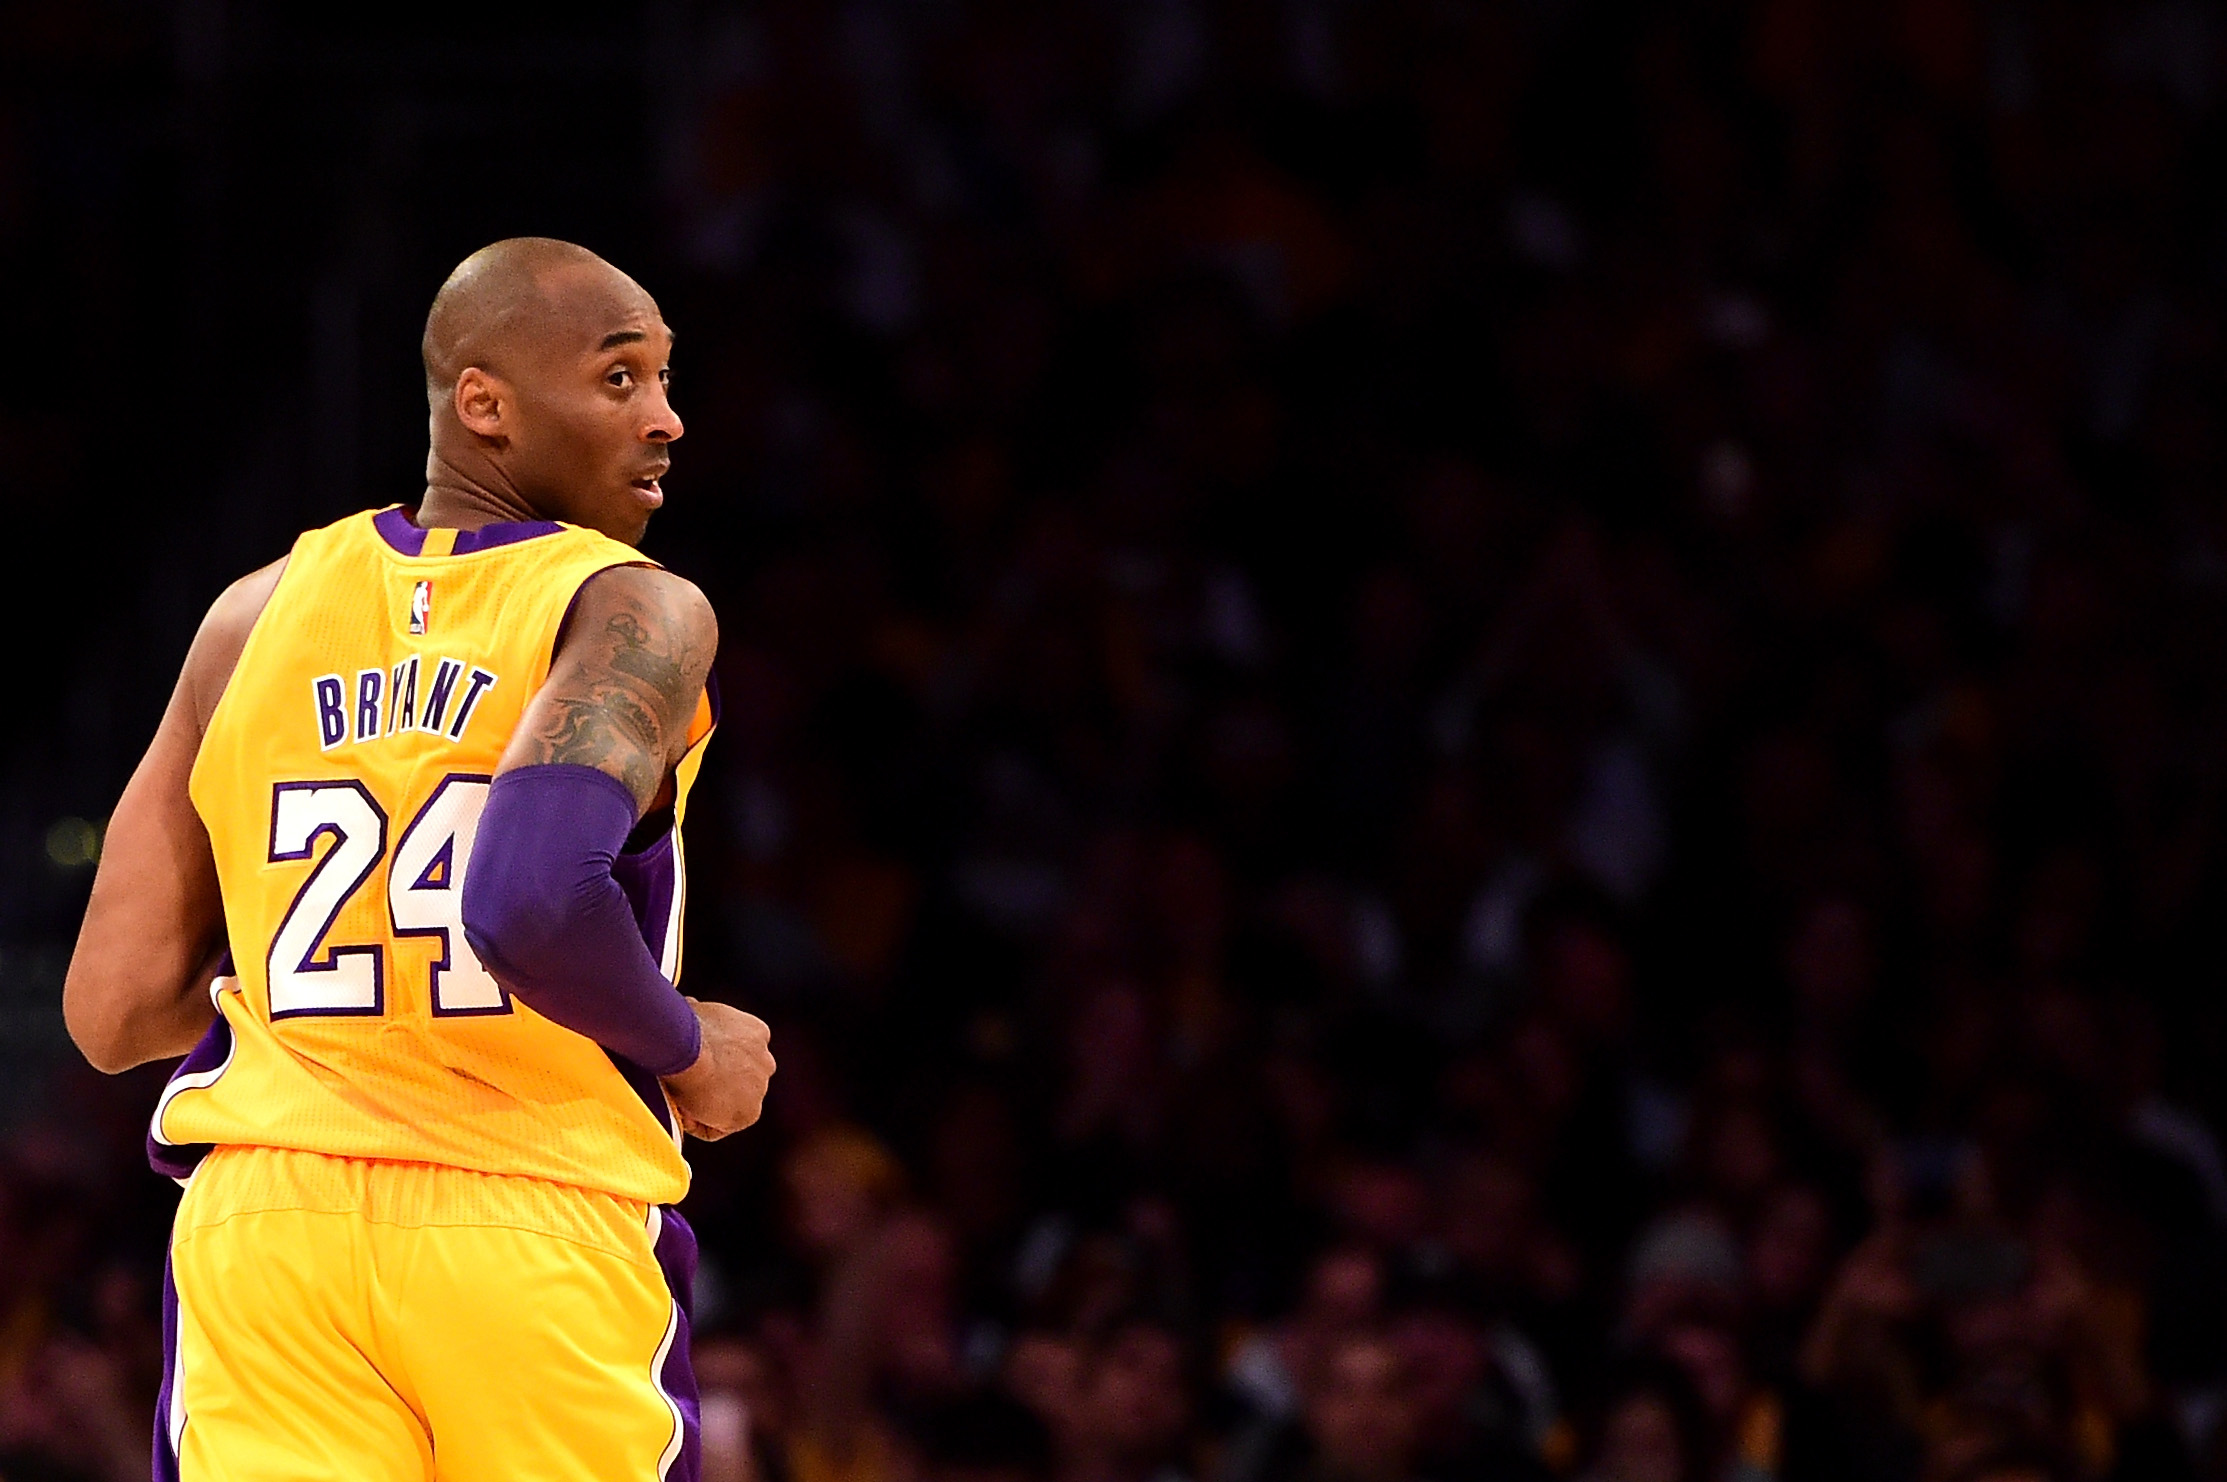 Lakers legend Kobe Bryant signs off from NBA with 60 incredible points